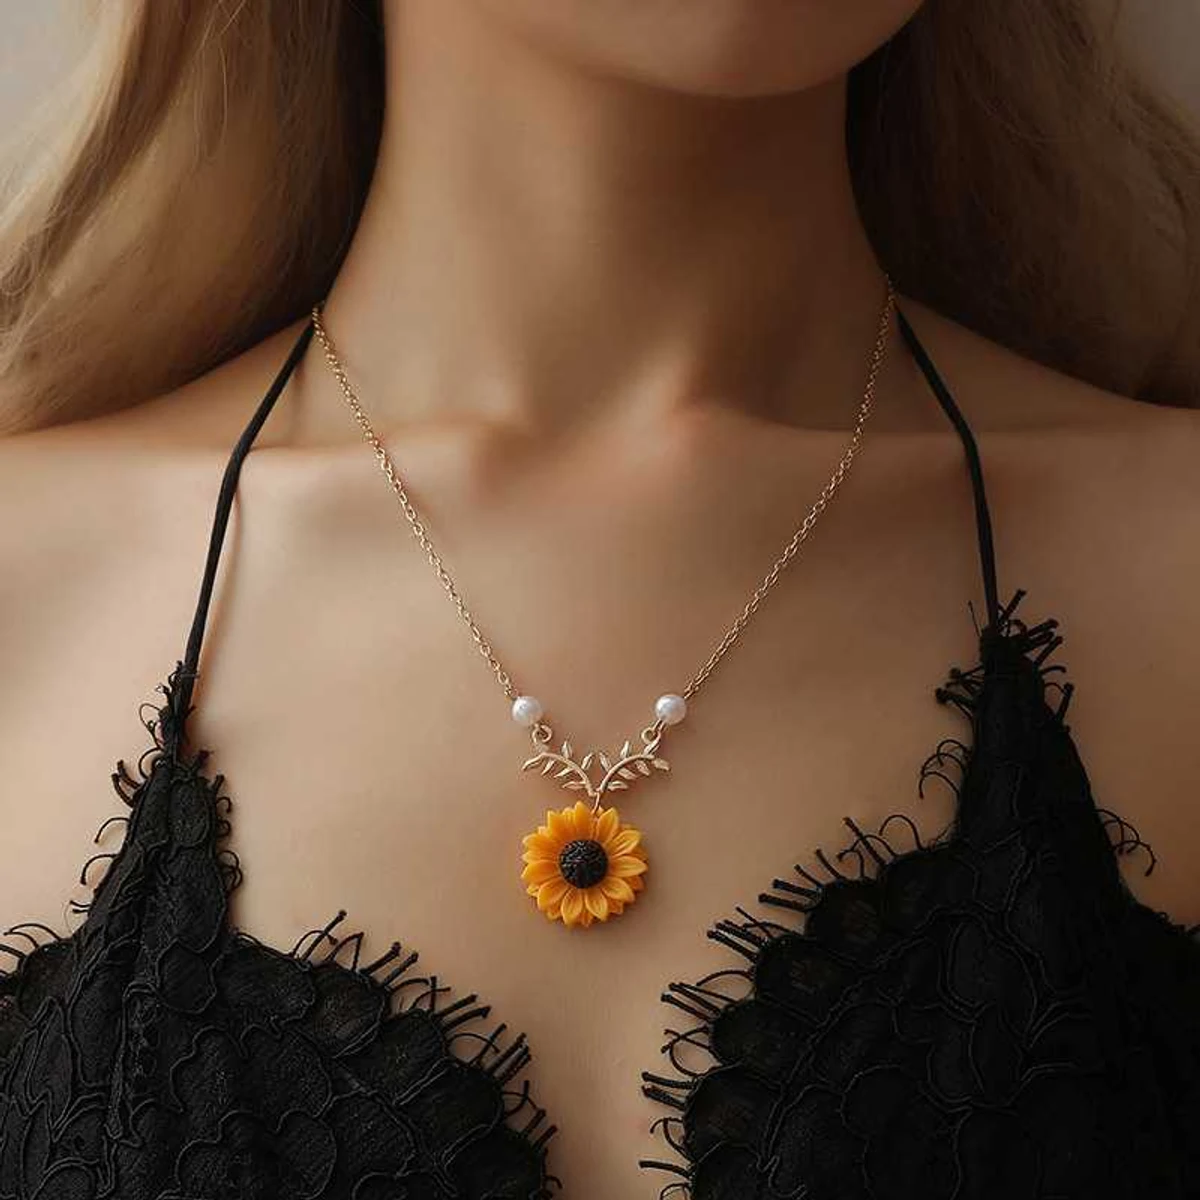 Sunflower Stylish New Necklace For Girl/Women